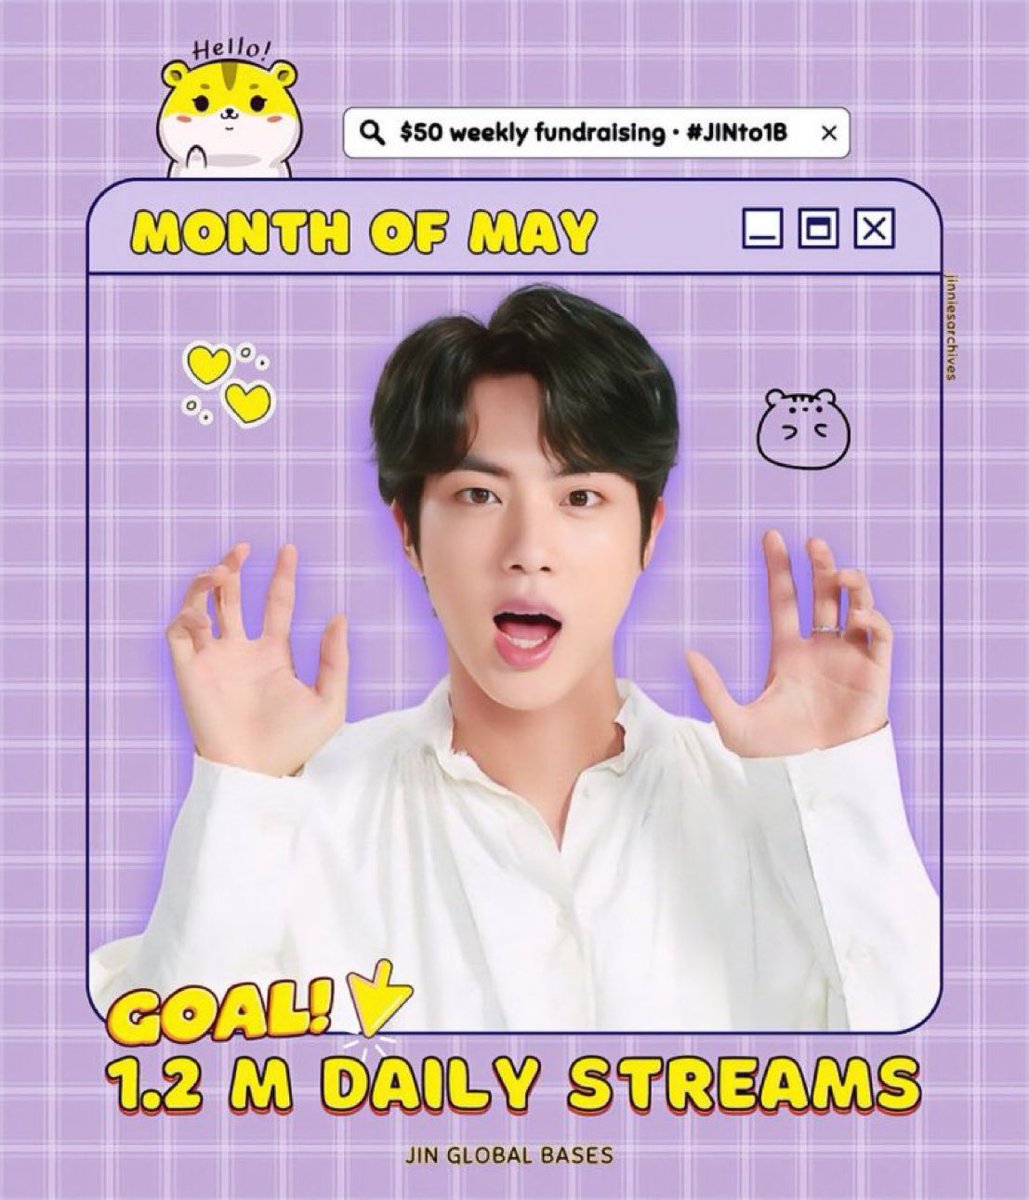 🚀 Join our 1.2M daily fundraising project to get KSJ1 funds and reach 1B in this month! 💿Spotify: bit.ly/3wD8yGk 🎥Youtube: bit.ly/3WB5ghq 🍎AM: bit.ly/3wnJumS #TheAstronaut  #Jin #방탄소년단진